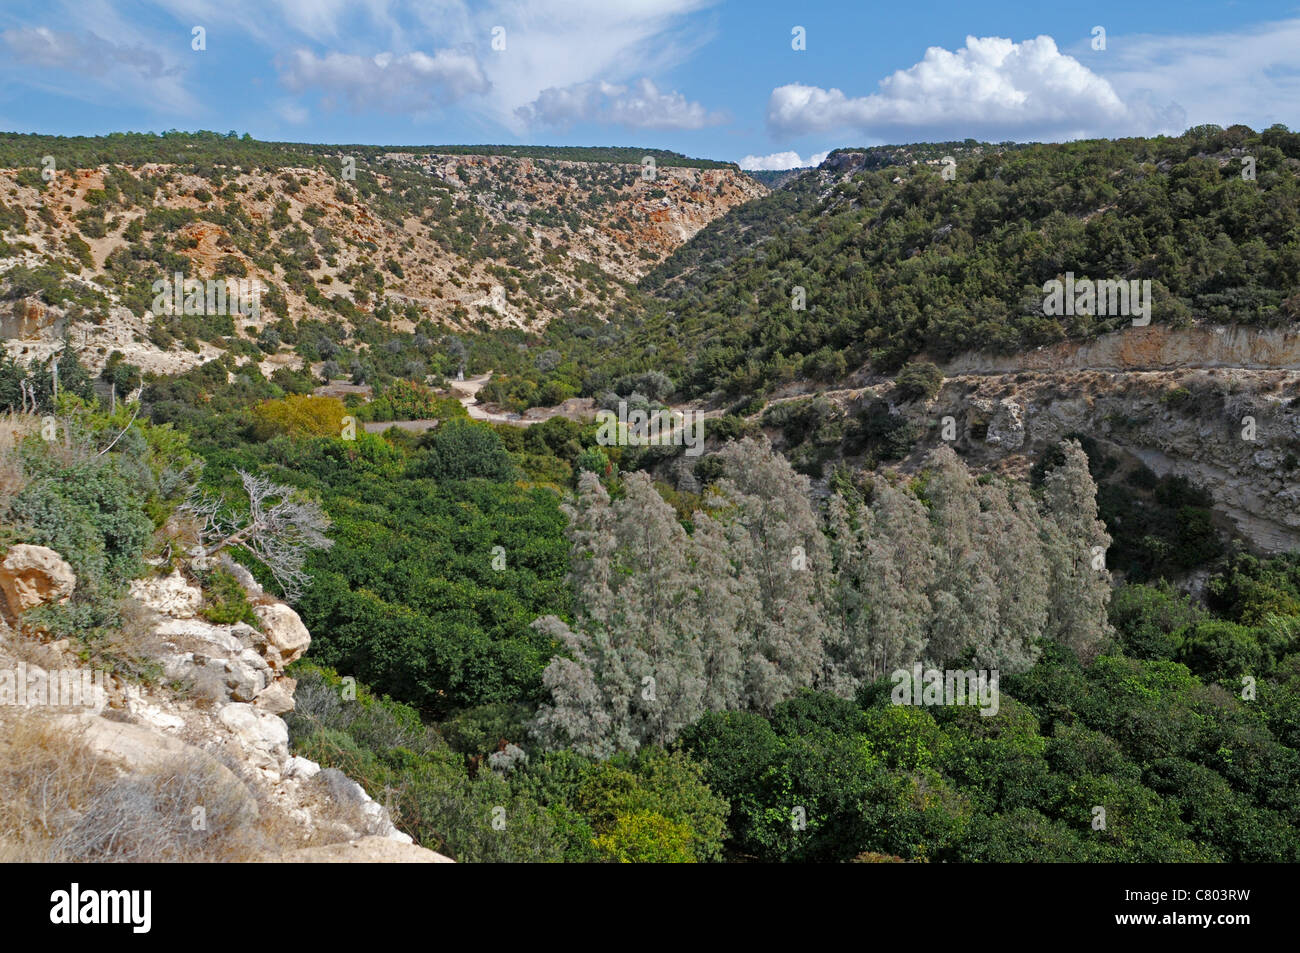 A fertile valley in a gorge in the Akamas Peninsula near the famous Akamas Gorge Stock Photo